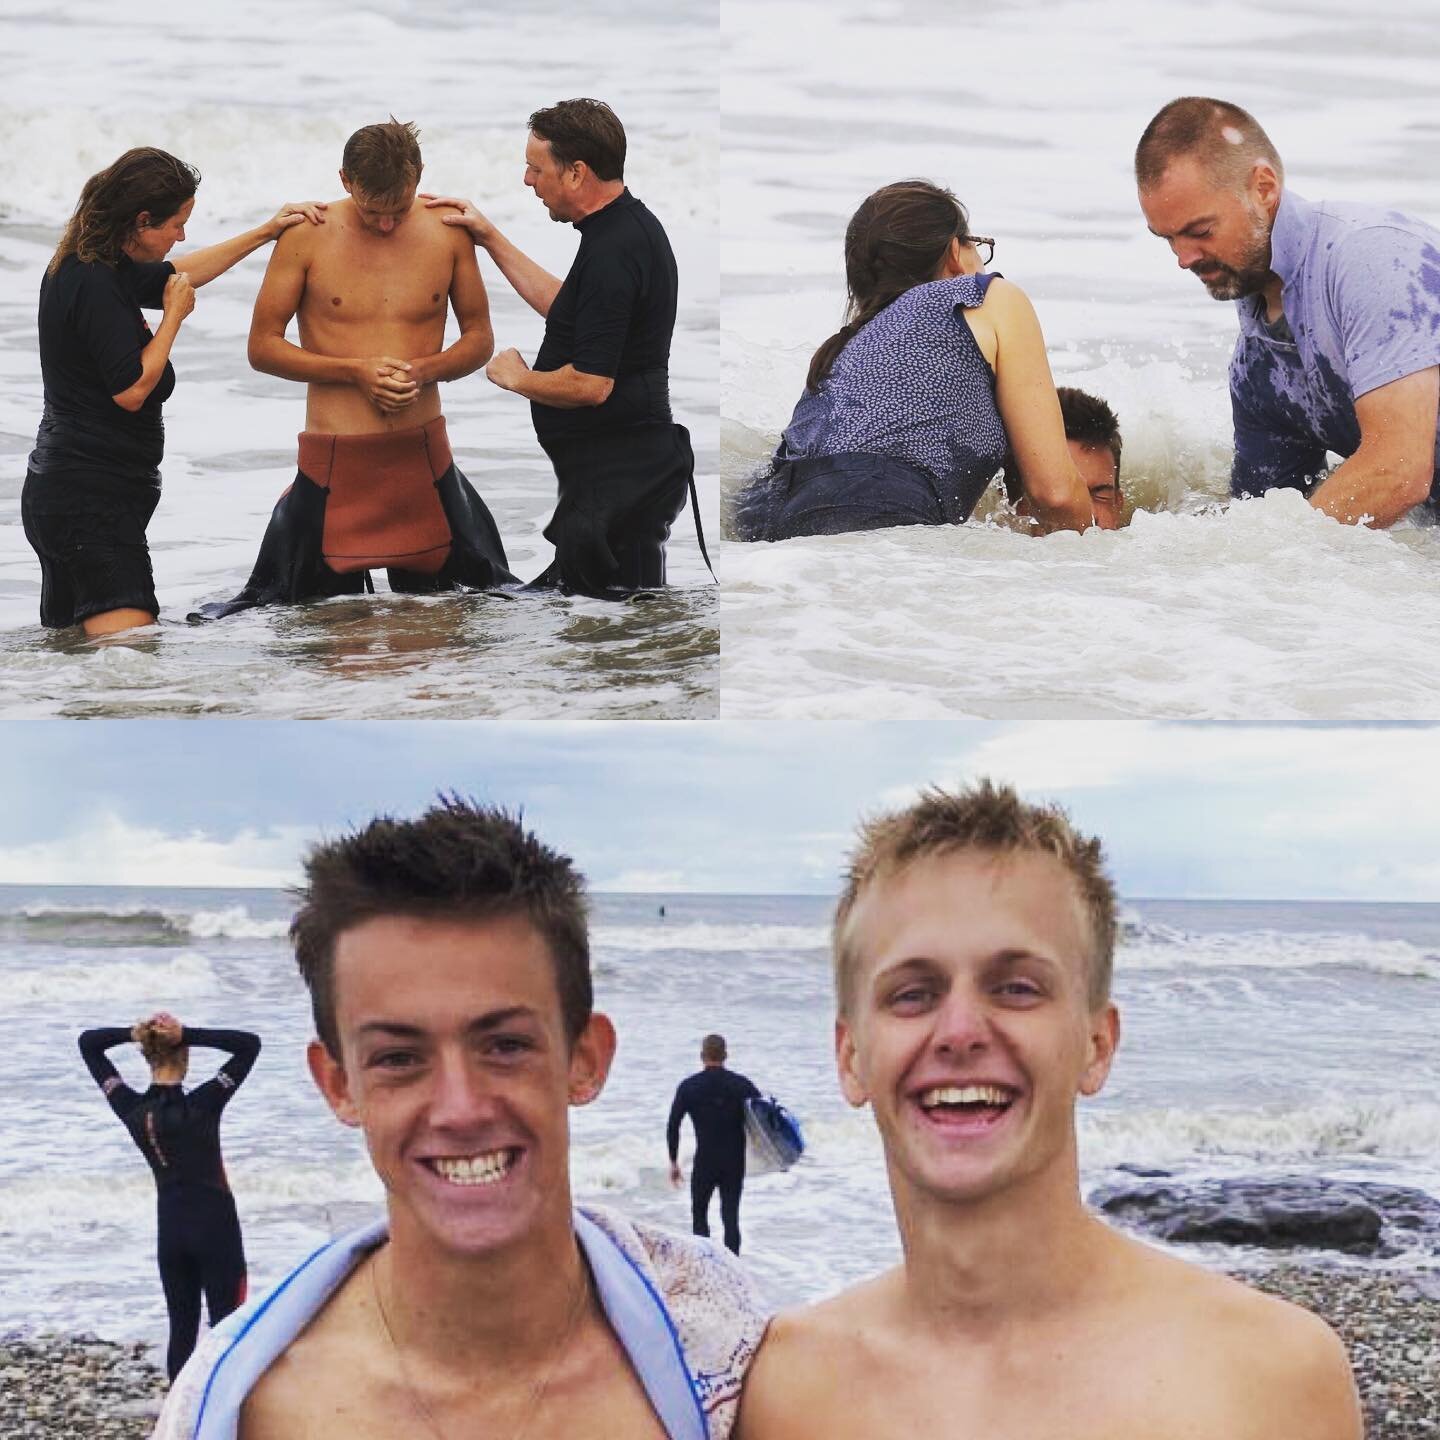 An amazing day was had by all last Friday! Congratulations to Ben and Josh for their baptisms and surfing skills 🏄🏼&zwj;♂️🏄🏻&zwj;♂️